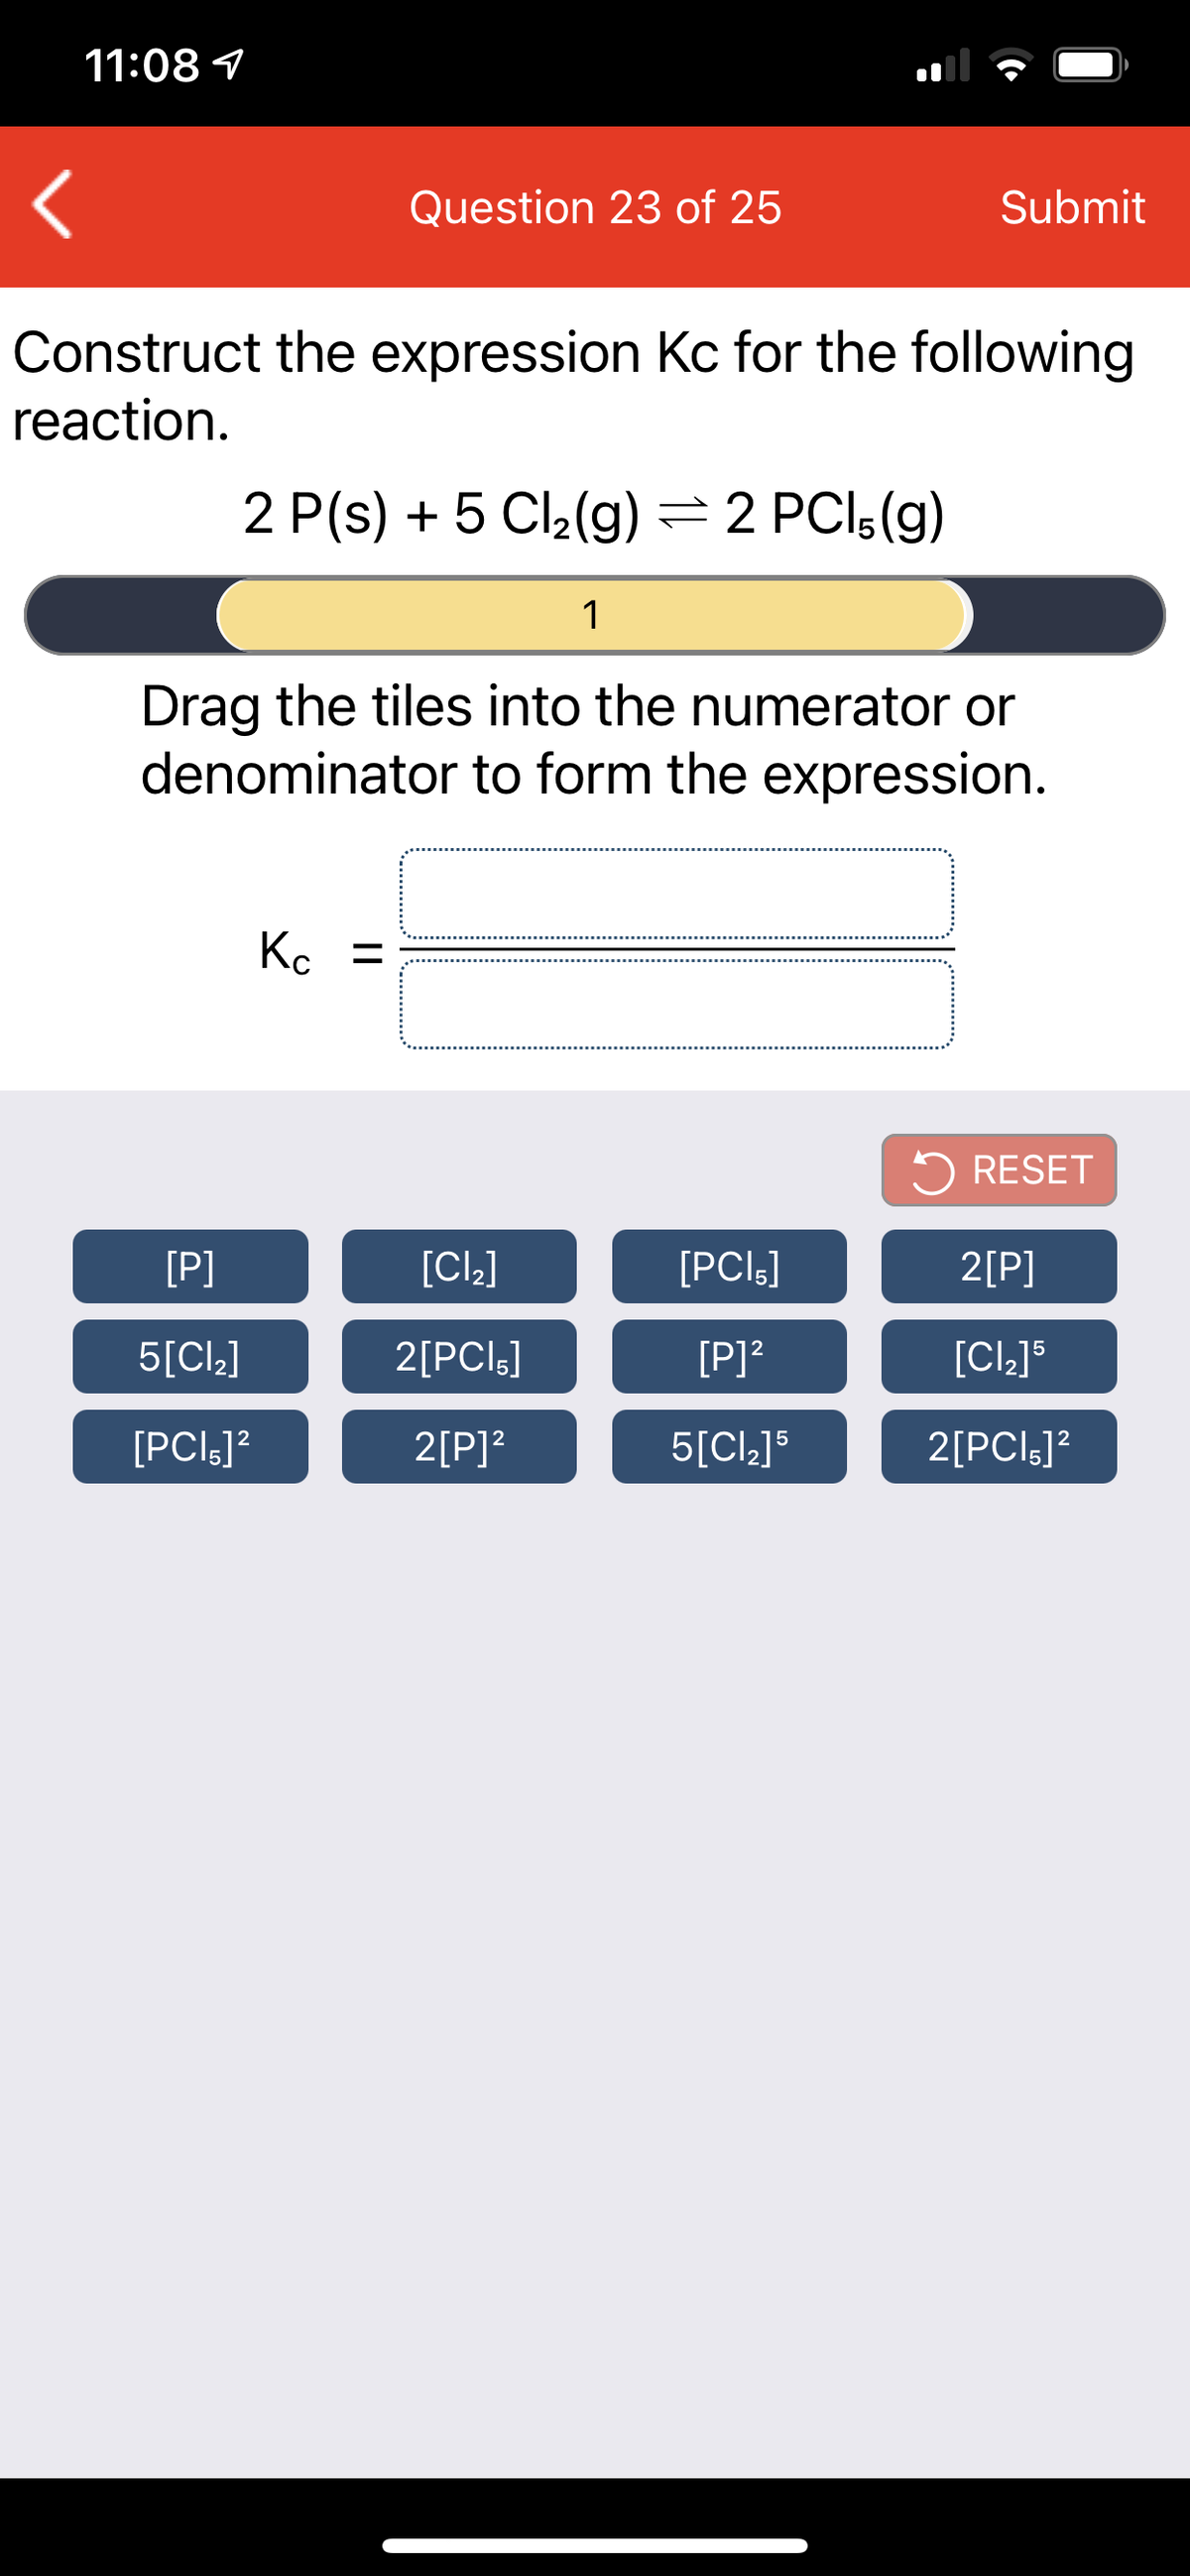 11:08 1
Question 23 of 25
Submit
Construct the expression Kc for the following
reaction.
2 P(s) + 5 Cl2(g) = 2 PCI;(g)
1
Drag the tiles into the numerator or
denominator to form the expression.
K. =
5 RESET
[P]
[Cl.]
[PCIg]
2[P]
5[Cl_]
2[PCI;]
[P]?
[PCIs]?
2[P]?
5[Cl_]$
2[PCIs]?
